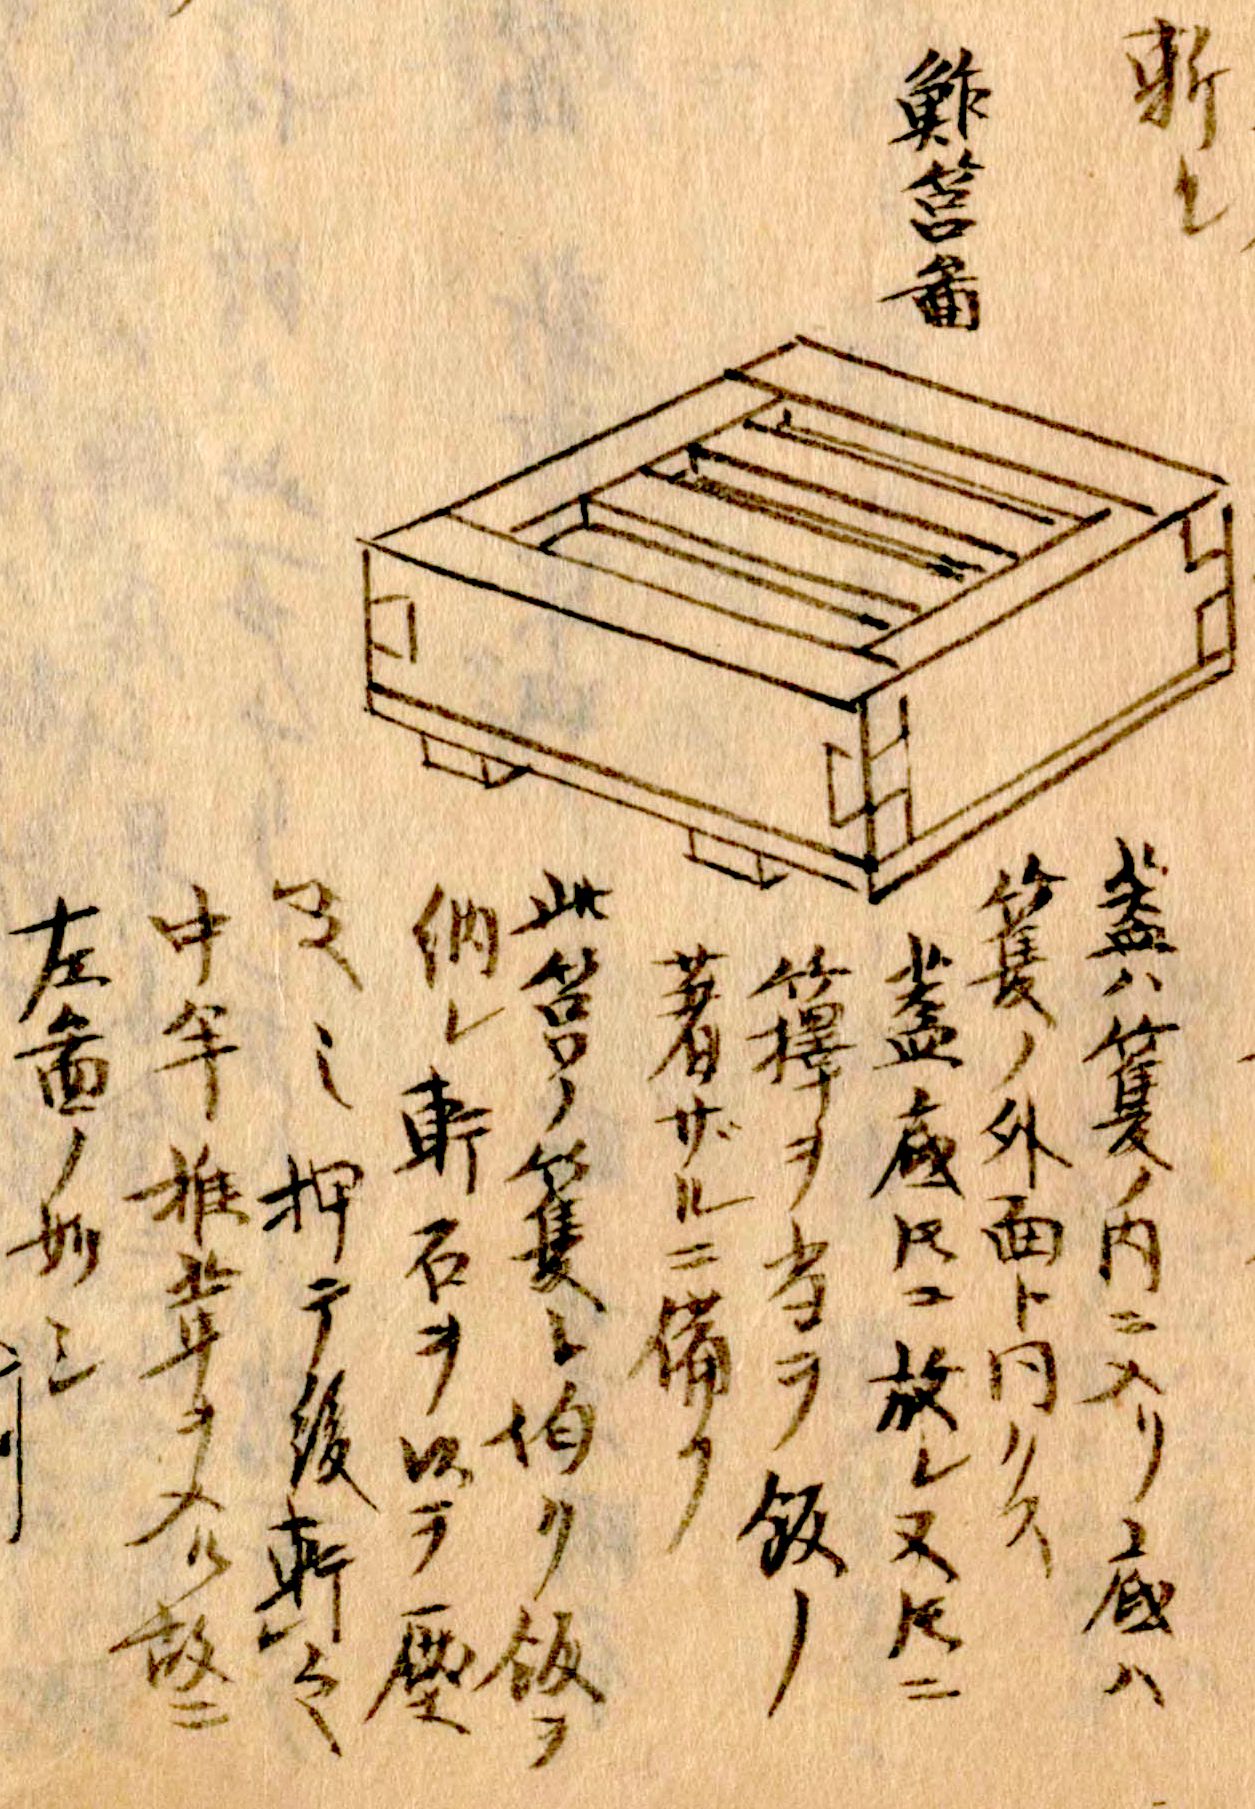 The hakozushi of Morisada’s time has not changed very much since. Toppings are laid on vinegared rice with a lid on top, and then it is pressed down by hand or with a weight. From Morisada mankō (Morisada’s Sketches). (Courtesy National Diet Library)